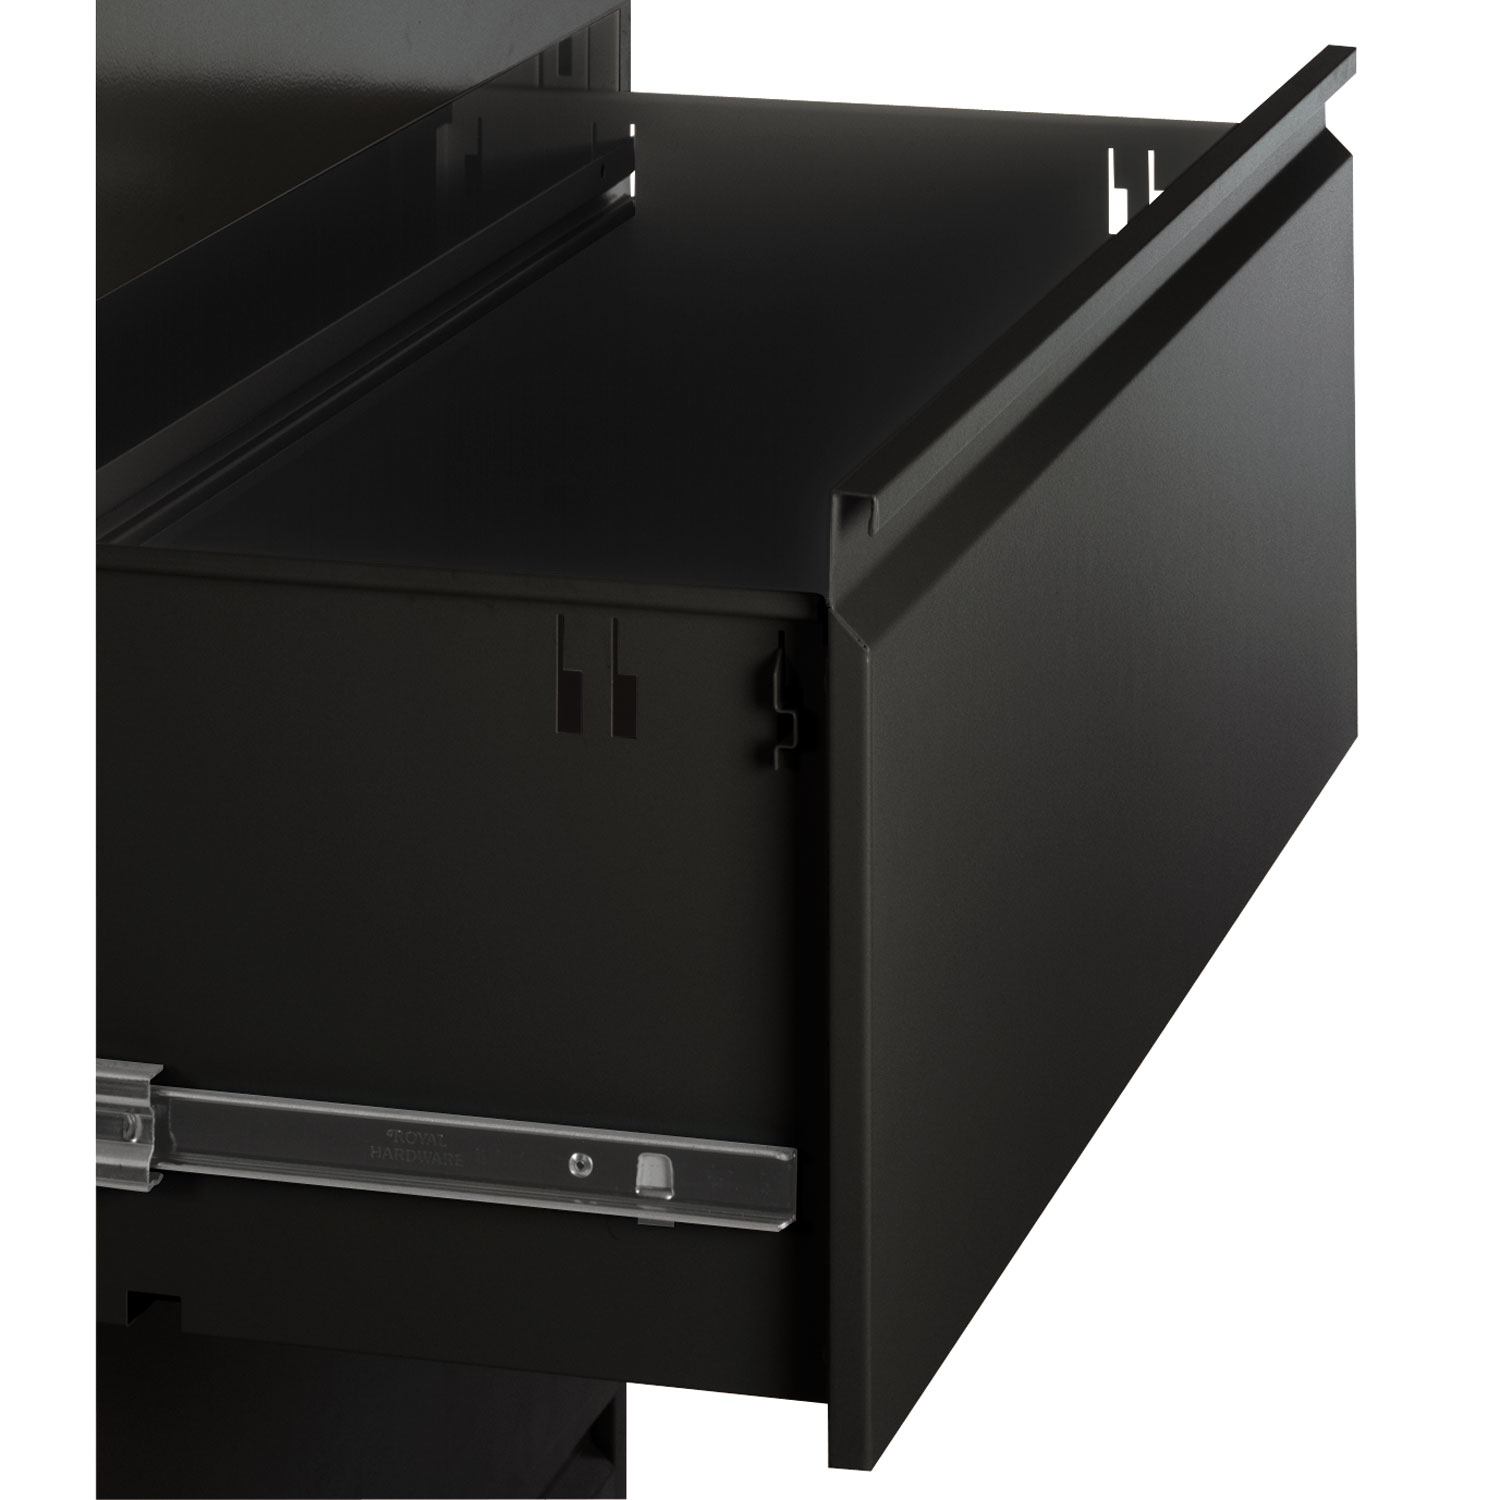 Four-Drawer Lateral File Cabinet, 42w x 18d x 52 1/2h, Black